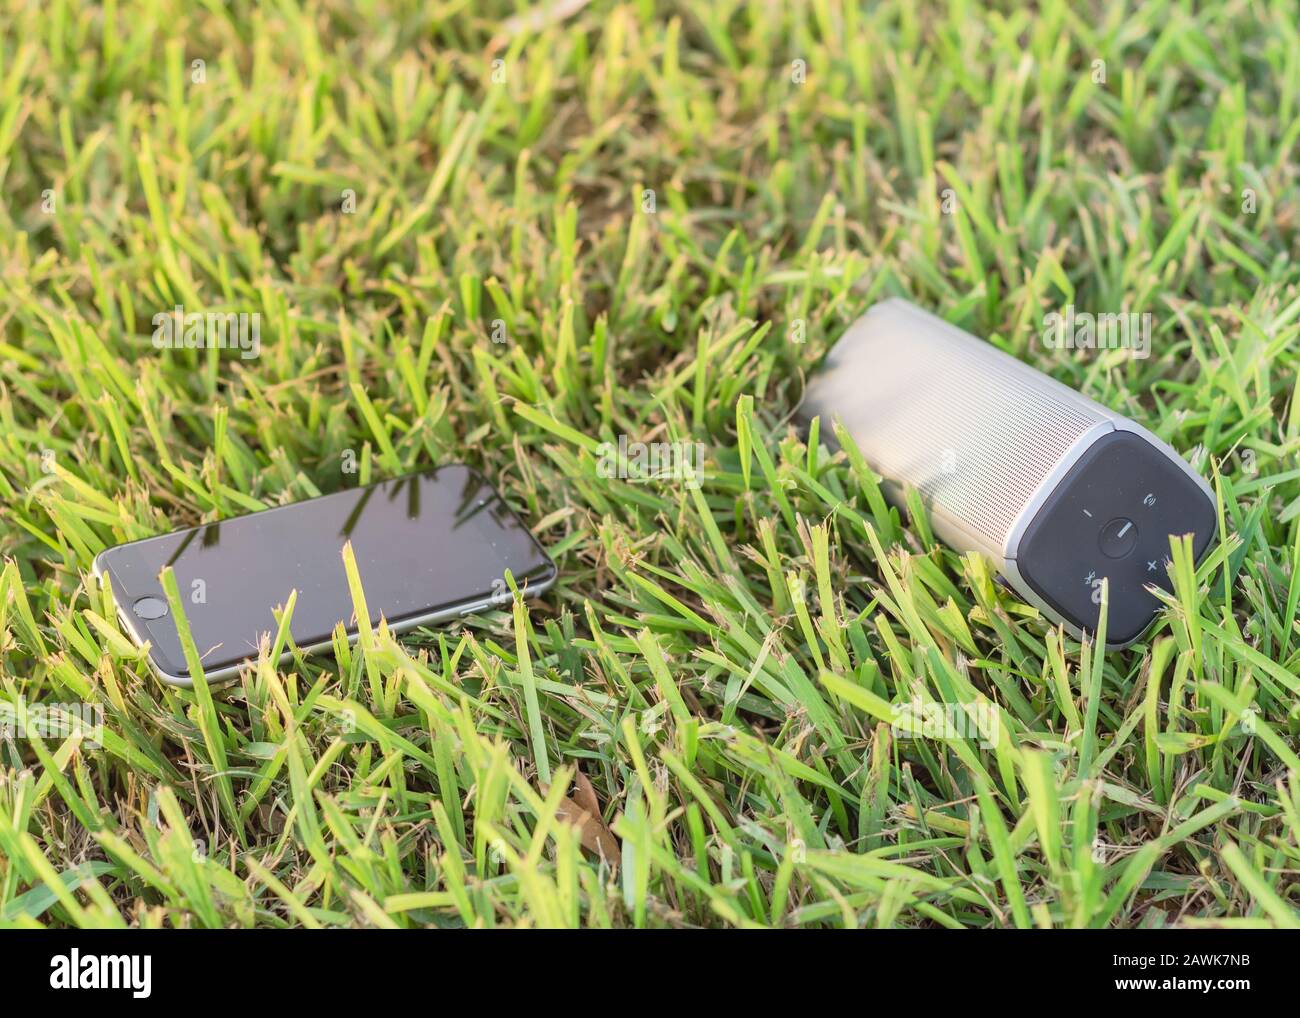 Typical smart phone and Bluetooth speaker on grass lawn nature environment  Stock Photo - Alamy